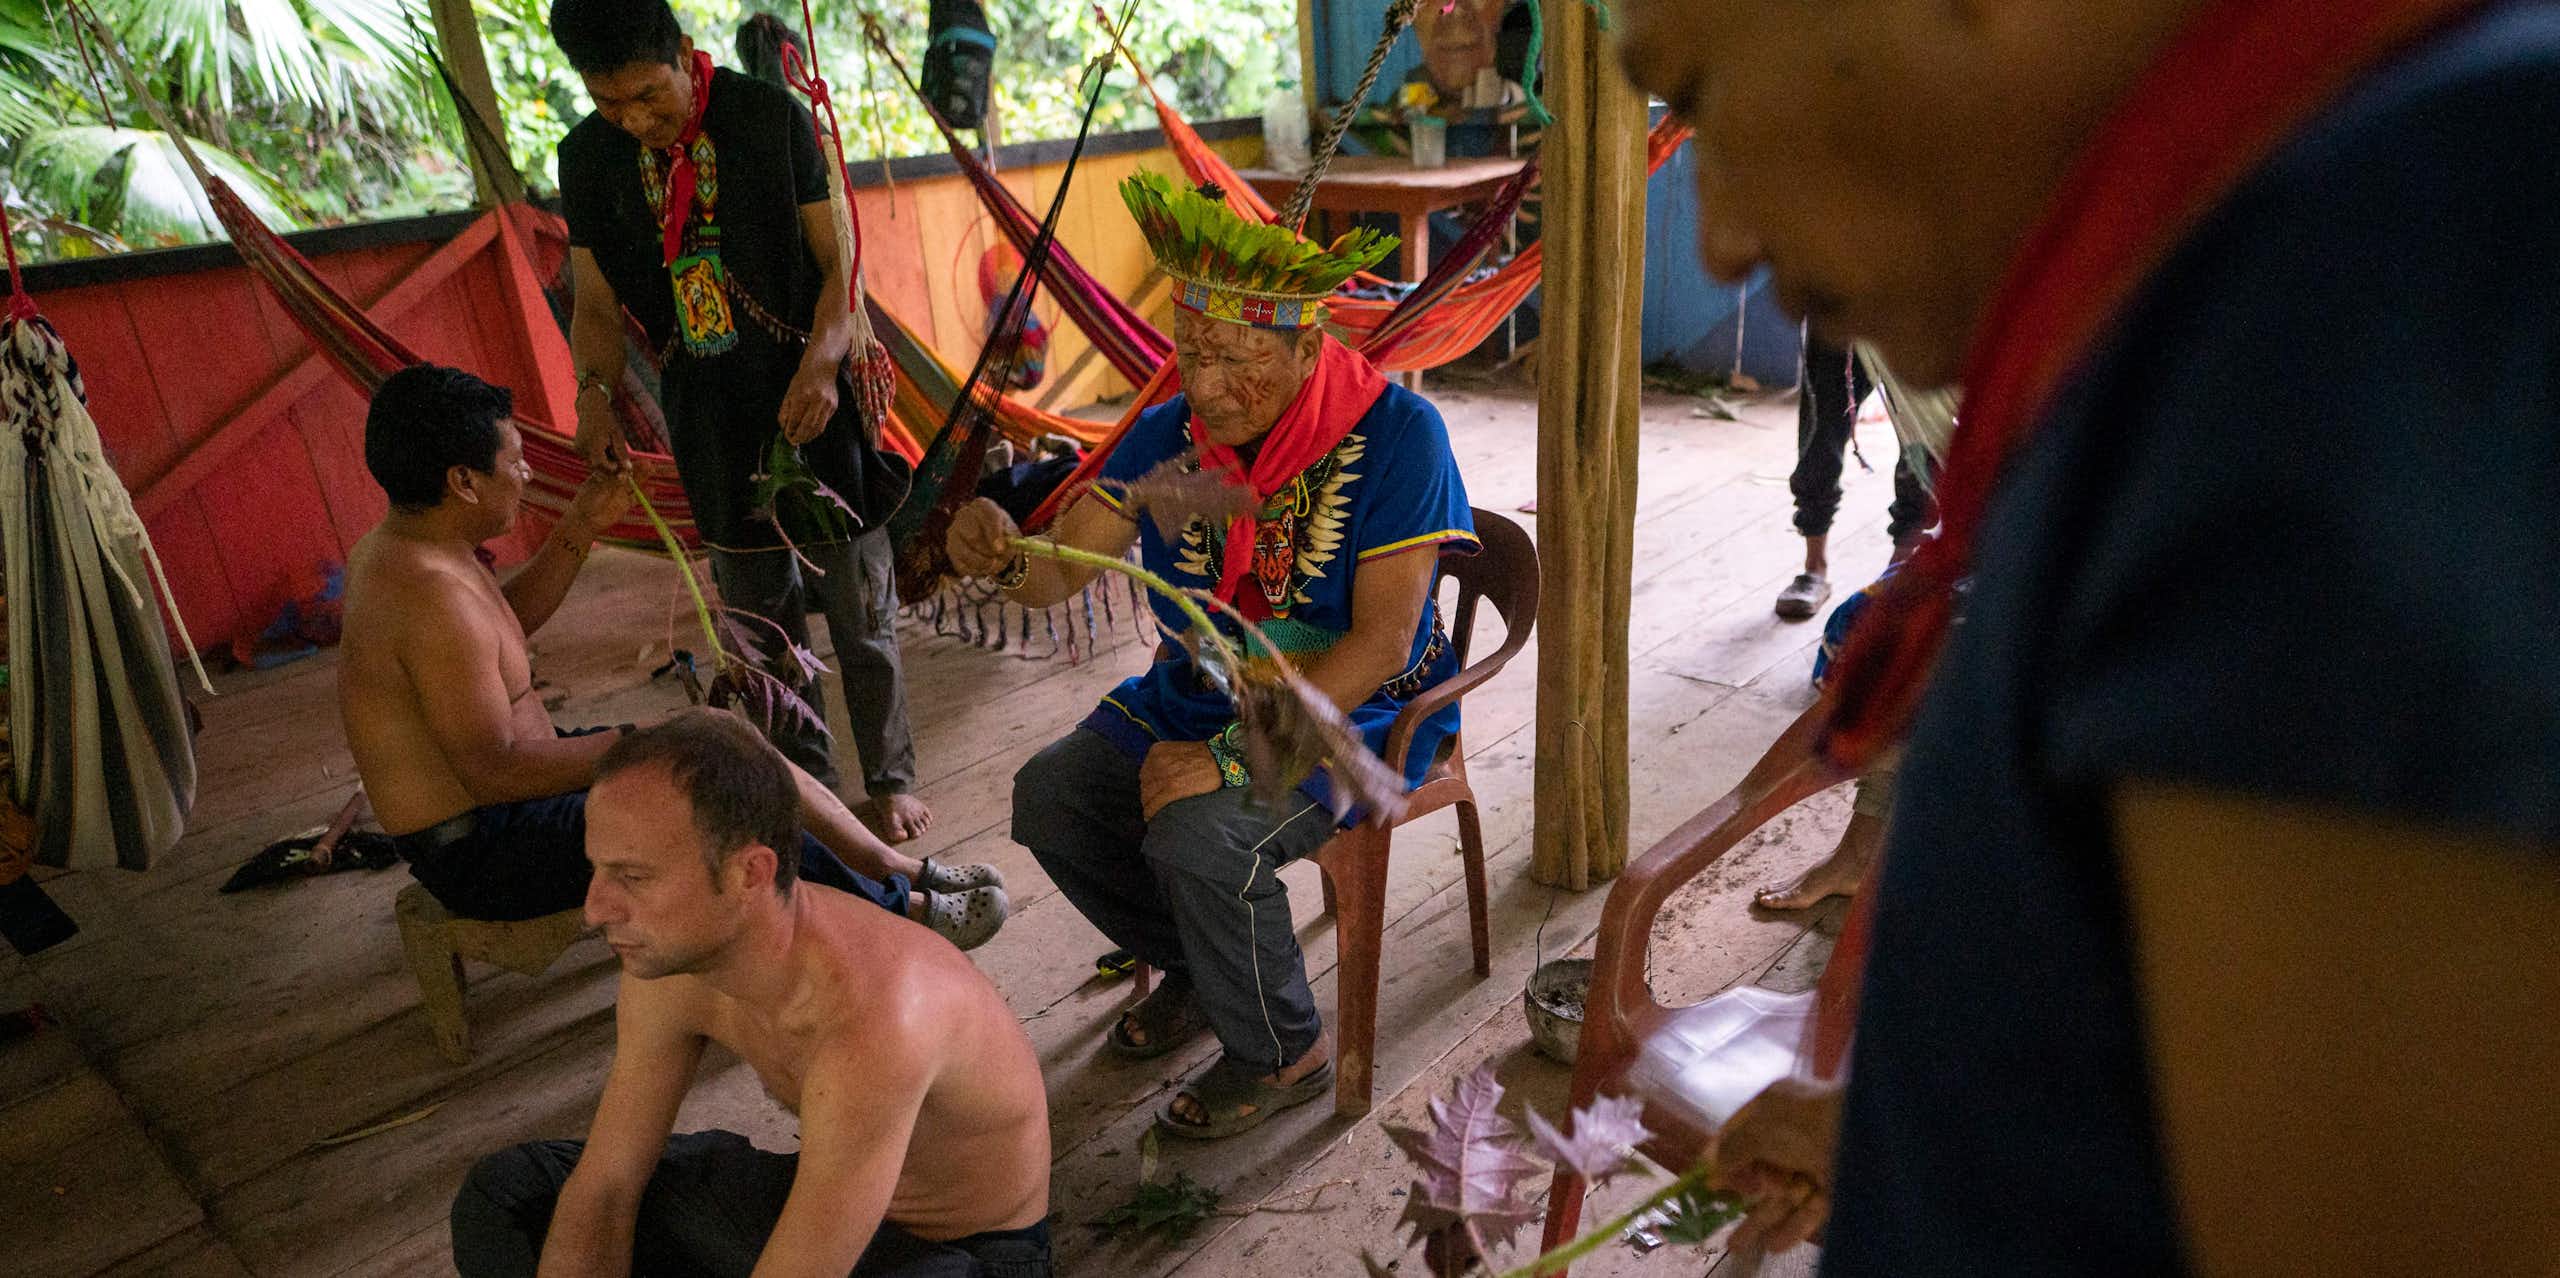 Two bare-chested men sit on the floor, while two others wearing traditional dress wave a plant near them.